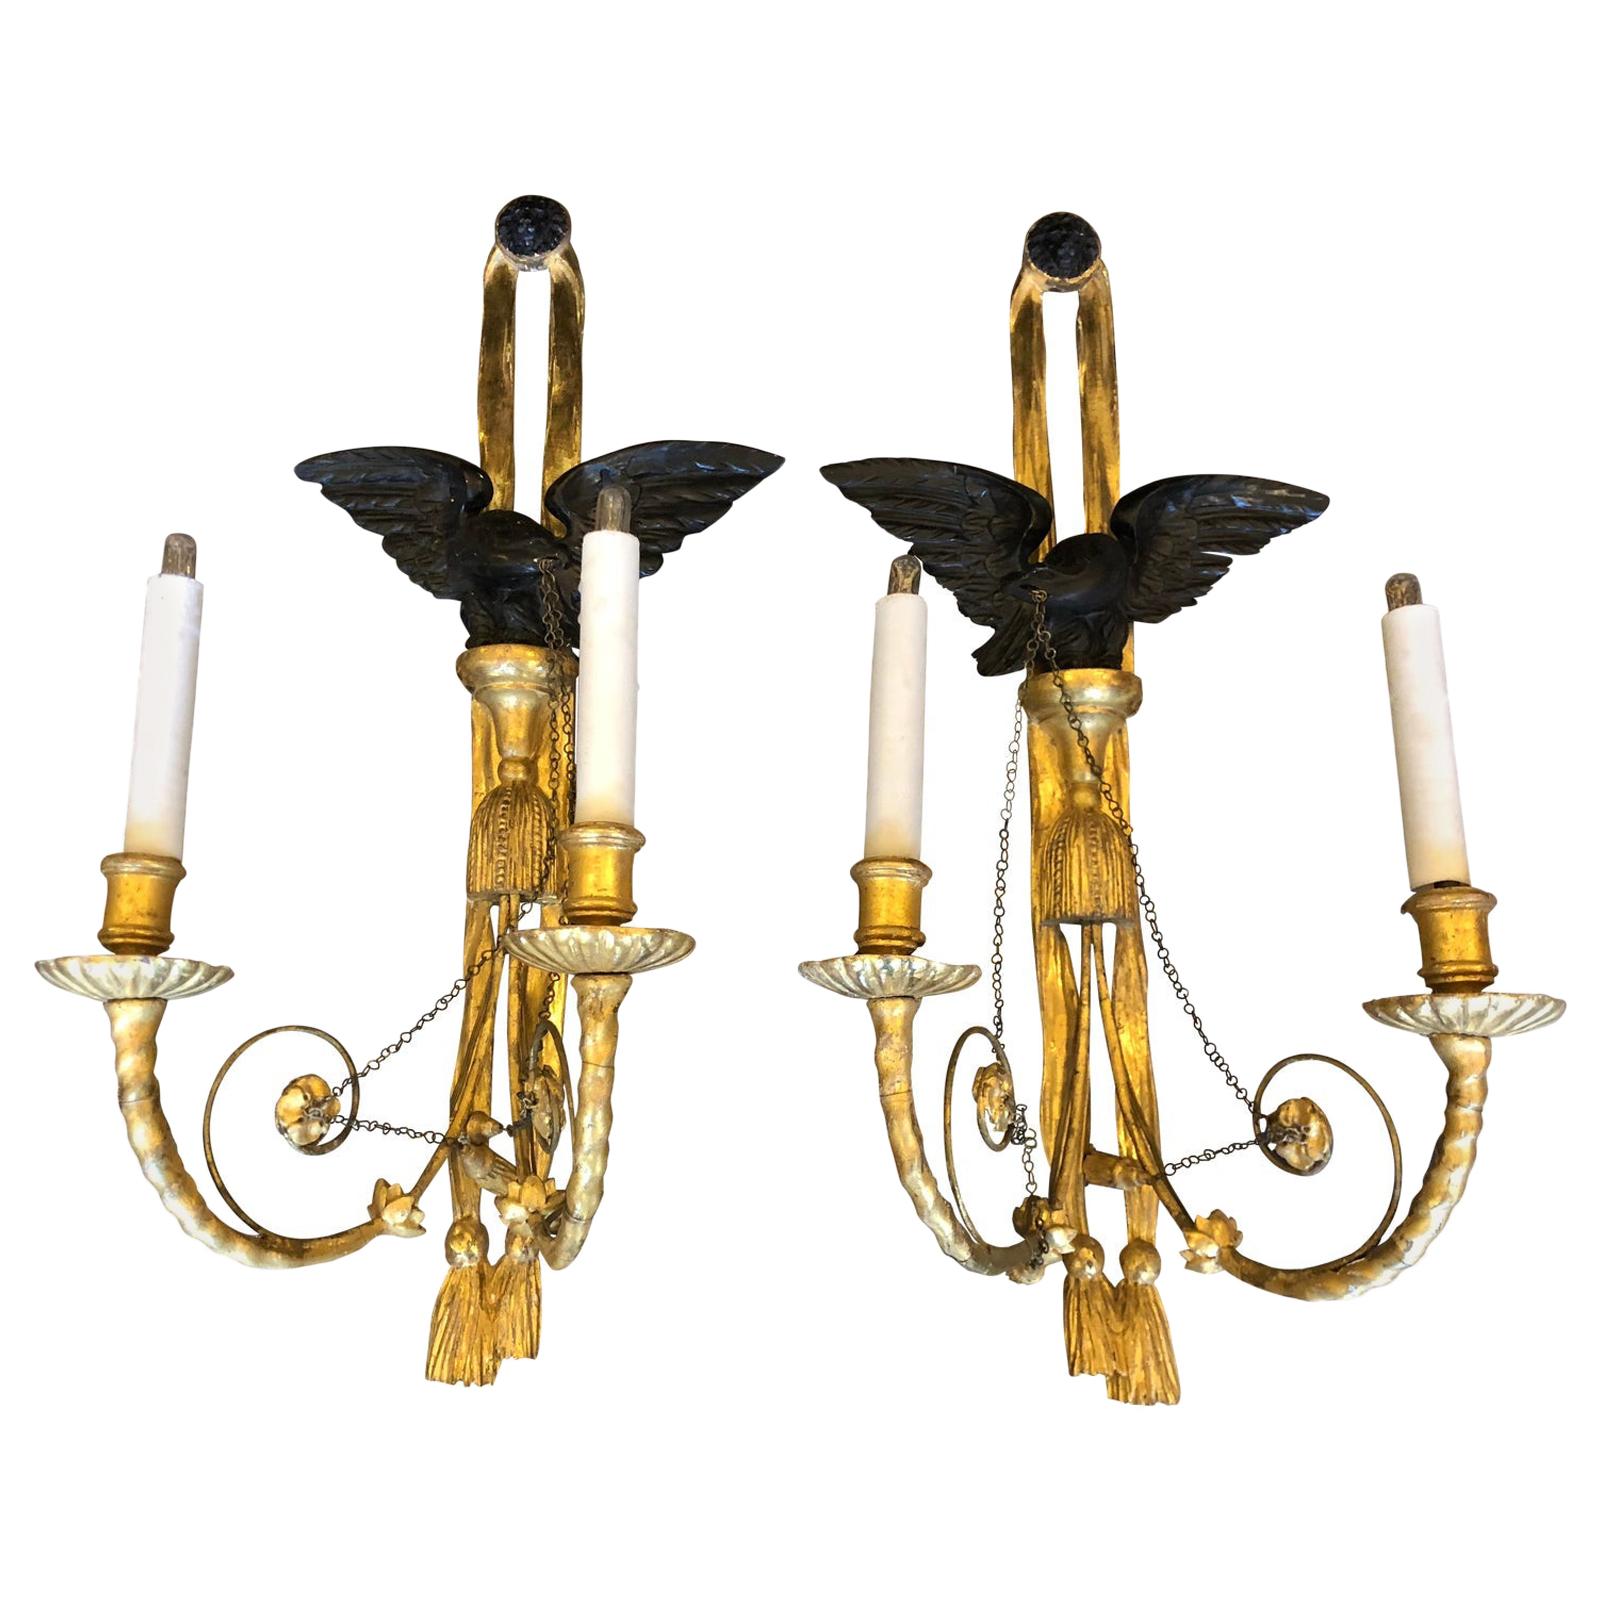 Pair of Antique Early 19th Century Federal Giltwood Wall Sconces with Eagles For Sale